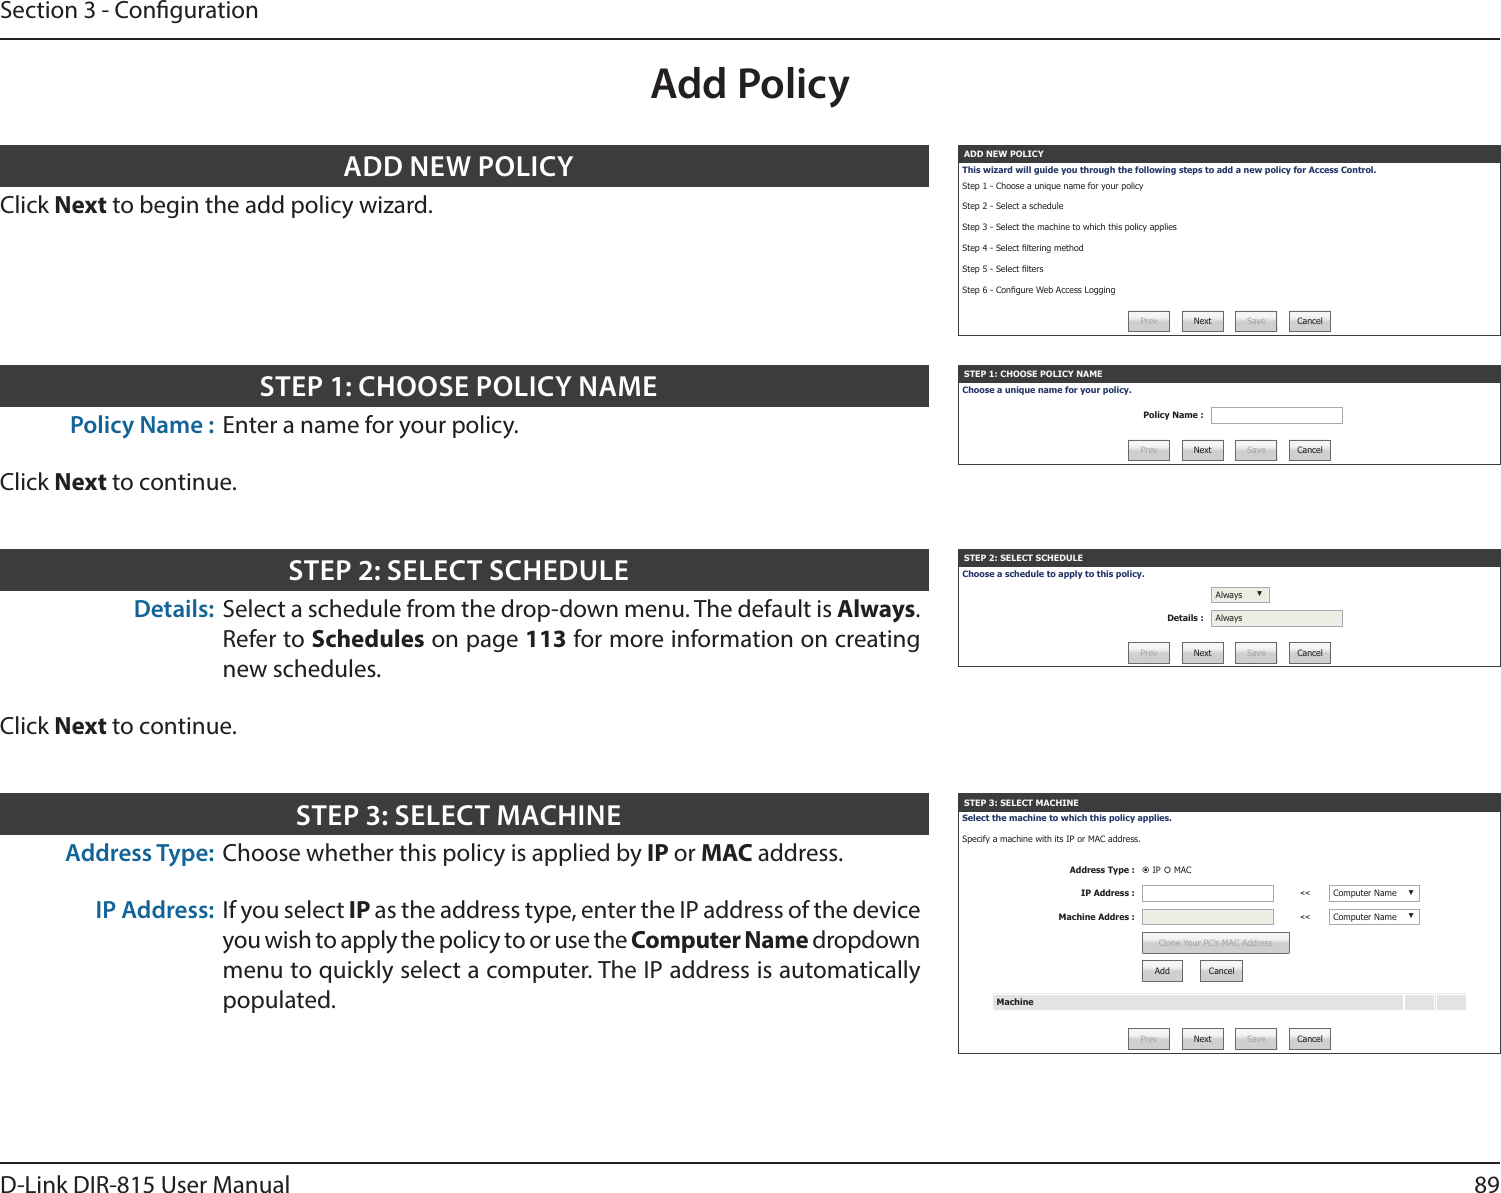 89D-Link DIR-815 User ManualSection 3 - CongurationAdd PolicyADD NEW POLICYThis wizard will guide you through the following steps to add a new policy for Access Control.Step 1 - Choose a unique name for your policy Step 2 - Select a scheduleStep 3 - Select the machine to which this policy appliesStep 4 - Select ltering methodStep 5 - Select ltersStep 6 - Congure Web Access LoggingPrev Next Save CancelClick Next to begin the add policy wizard.ADD NEW POLICYSTEP 1: CHOOSE POLICY NAMEChoose a unique name for your policy.Policy Name :Prev Next Save CancelPolicy Name : Enter a name for your policy.Click Next to continue.STEP 1: CHOOSE POLICY NAMESTEP 2: SELECT SCHEDULEChoose a schedule to apply to this policy.Always ▼Details : AlwaysPrev Next Save CancelDetails: Select a schedule from the drop-down menu. The default is Always. Refer to Schedules on page 113 for more information on creating new schedules.Click Next to continue.STEP 2: SELECT SCHEDULESTEP 3: SELECT MACHINESelect the machine to which this policy applies. Specify a machine with its IP or MAC address.Address Type :  IP  MACIP Address : &lt;&lt; Computer Name ▼Machine Addres : &lt;&lt; Computer Name ▼Clone Your PC’s MAC AddressAdd CancelMachinePrev Next Save CancelAddress Type: Choose whether this policy is applied by IP or MAC address.IP Address: If you select IP as the address type, enter the IP address of the device you wish to apply the policy to or use the Computer Name dropdown menu to quickly select a computer. The IP address is automatically populated.STEP 3: SELECT MACHINE